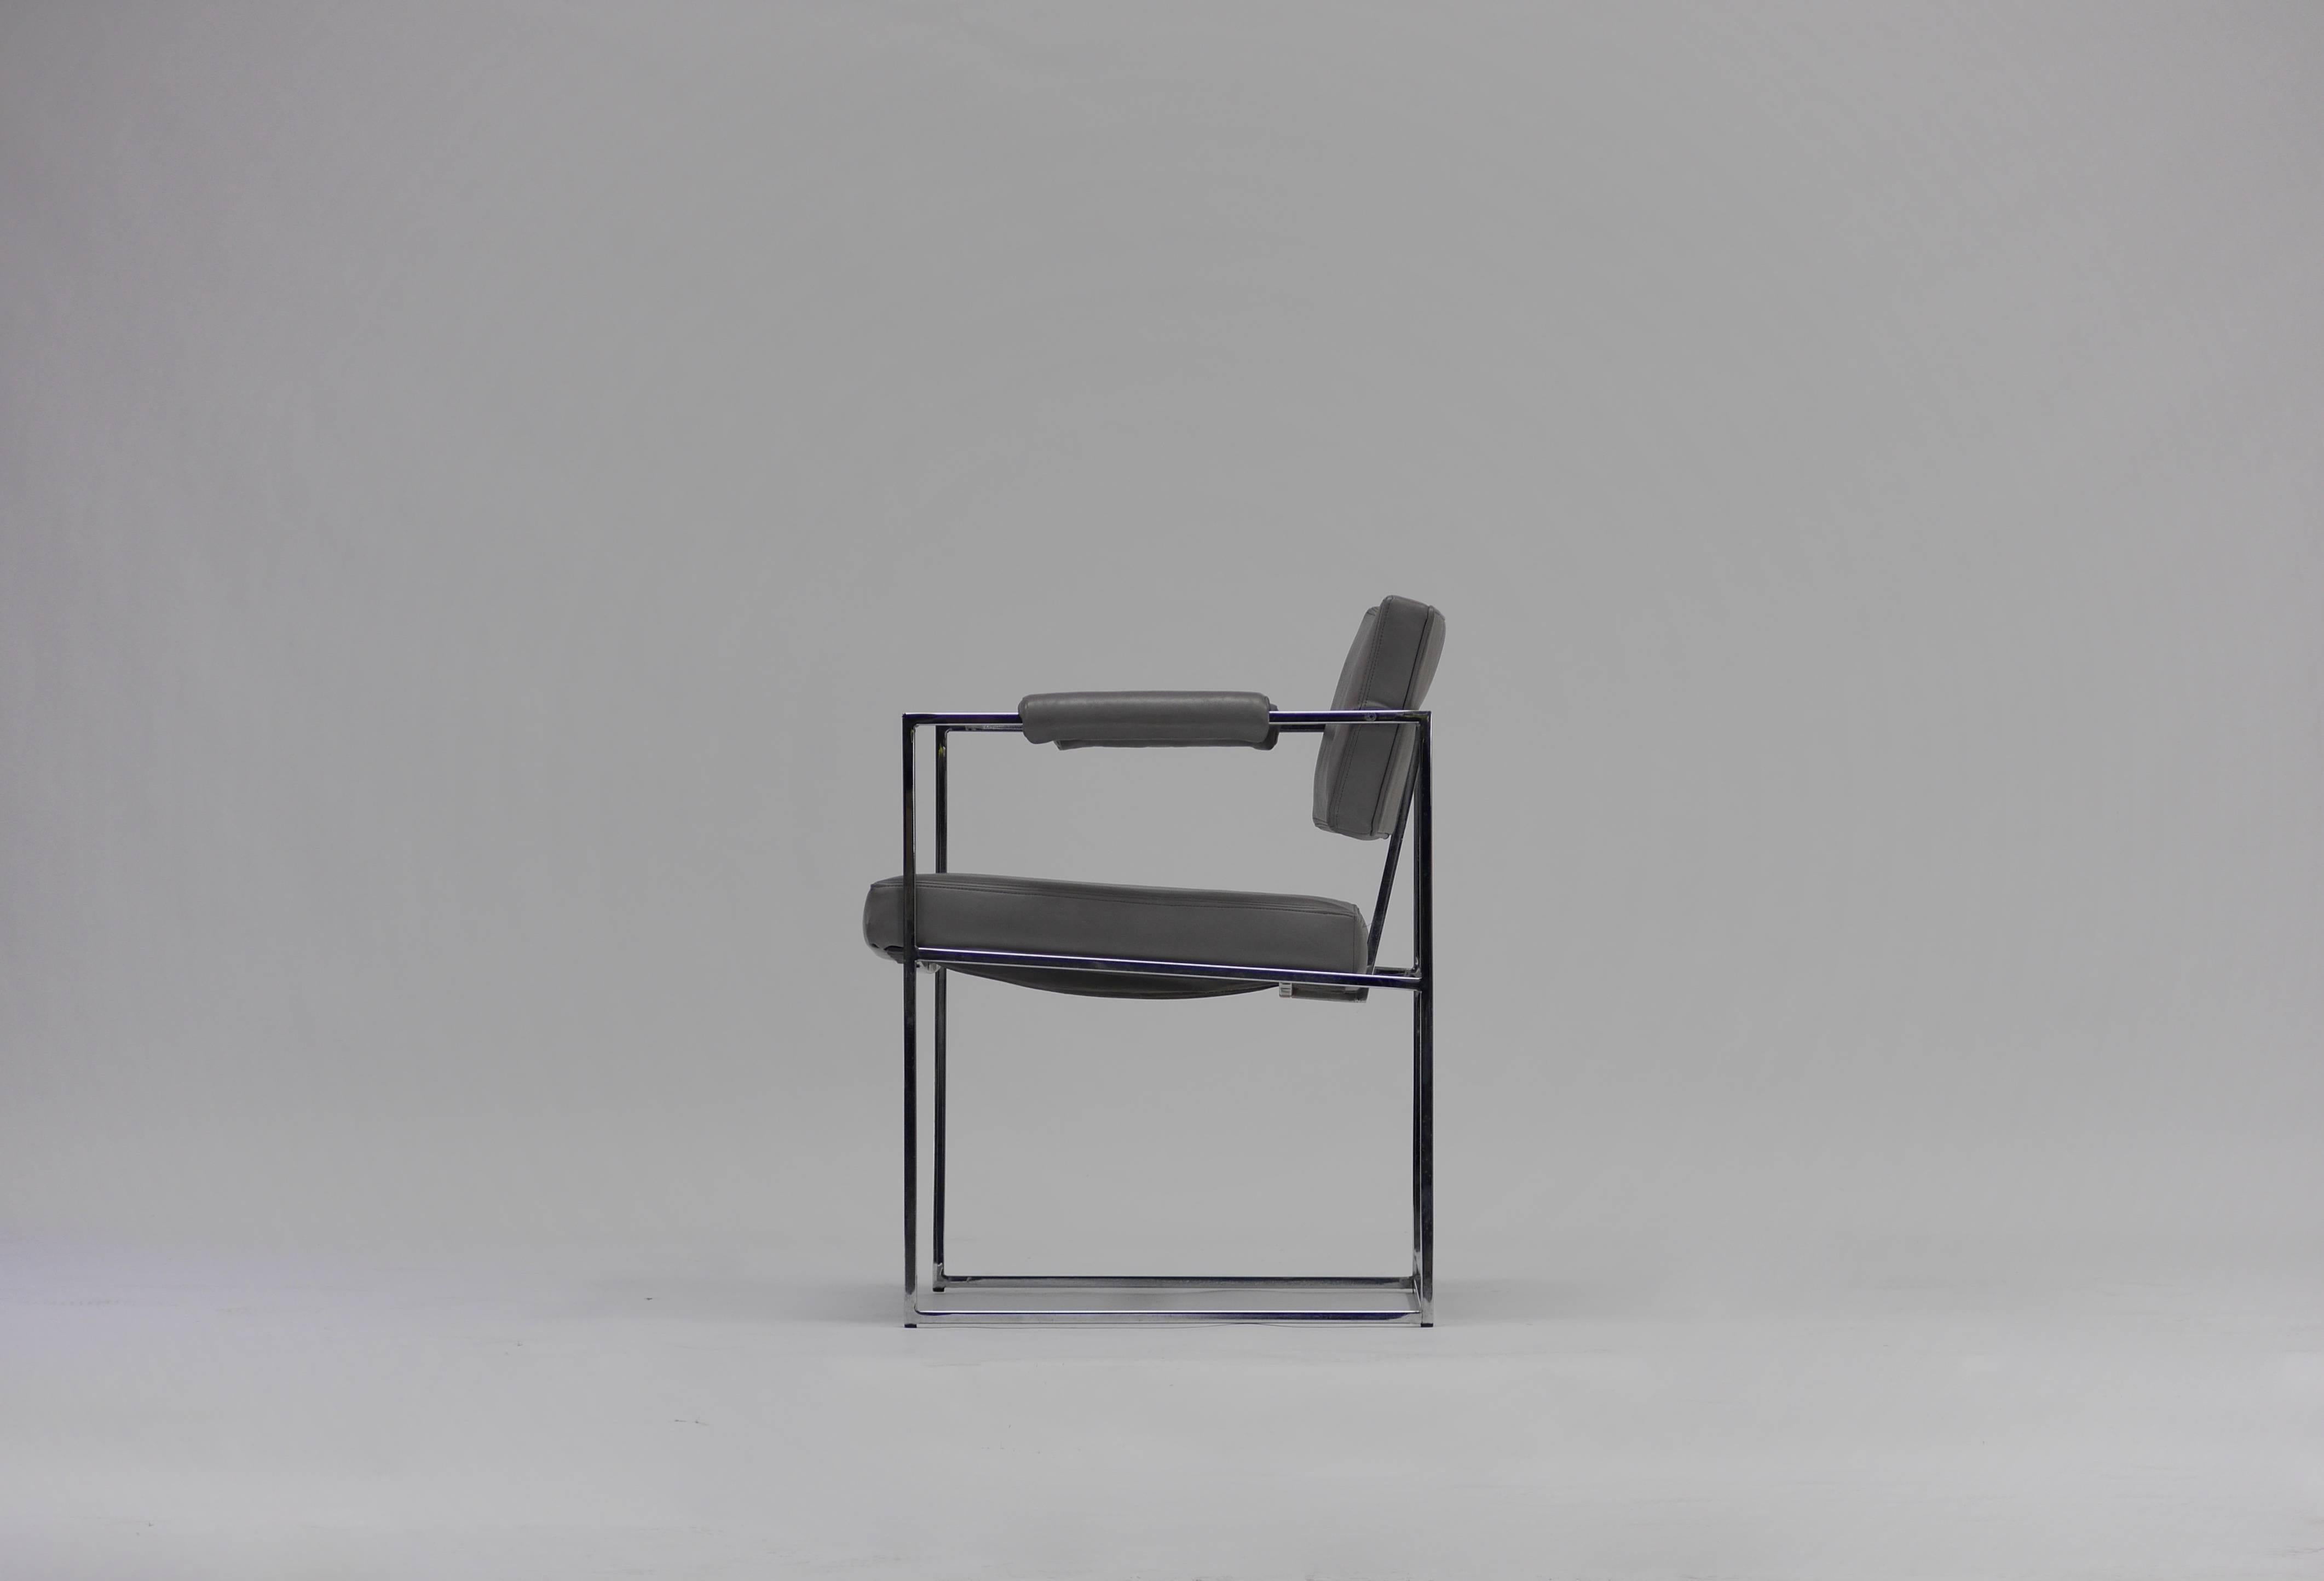 Twelve thin line dining chairs by Milo Baughman for Thayer Coggin.
We have two additional chairs if needed.